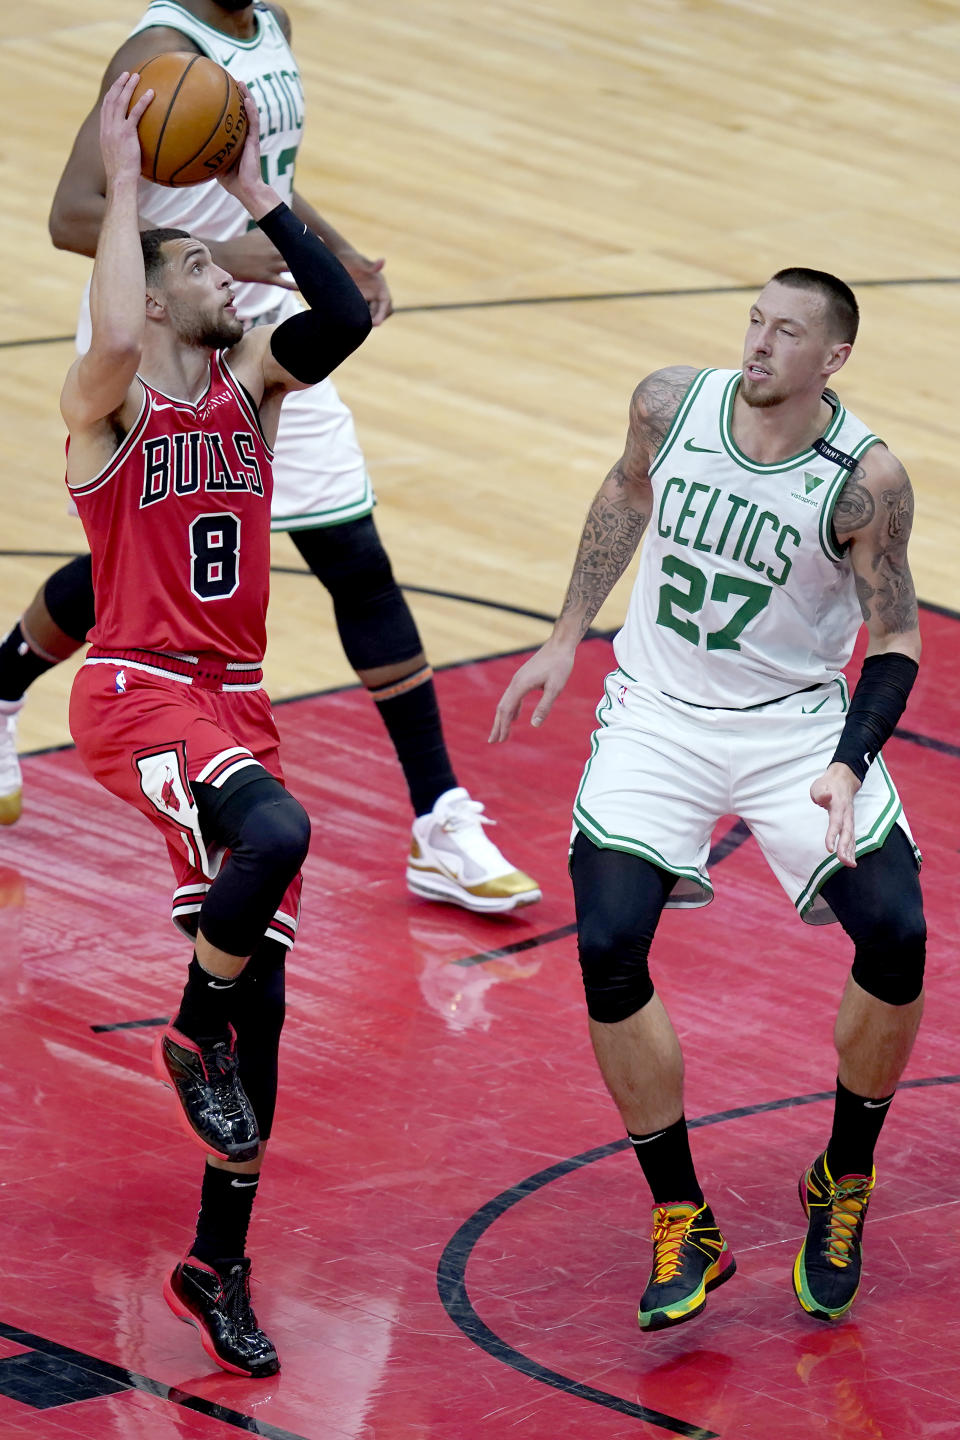 Chicago Bulls' Zach LaVine shoots over Boston Celtics' Daniel Theis during the second half of an NBA basketball game Monday, Jan. 25, 2021, in Chicago. (AP Photo/Charles Rex Arbogast)